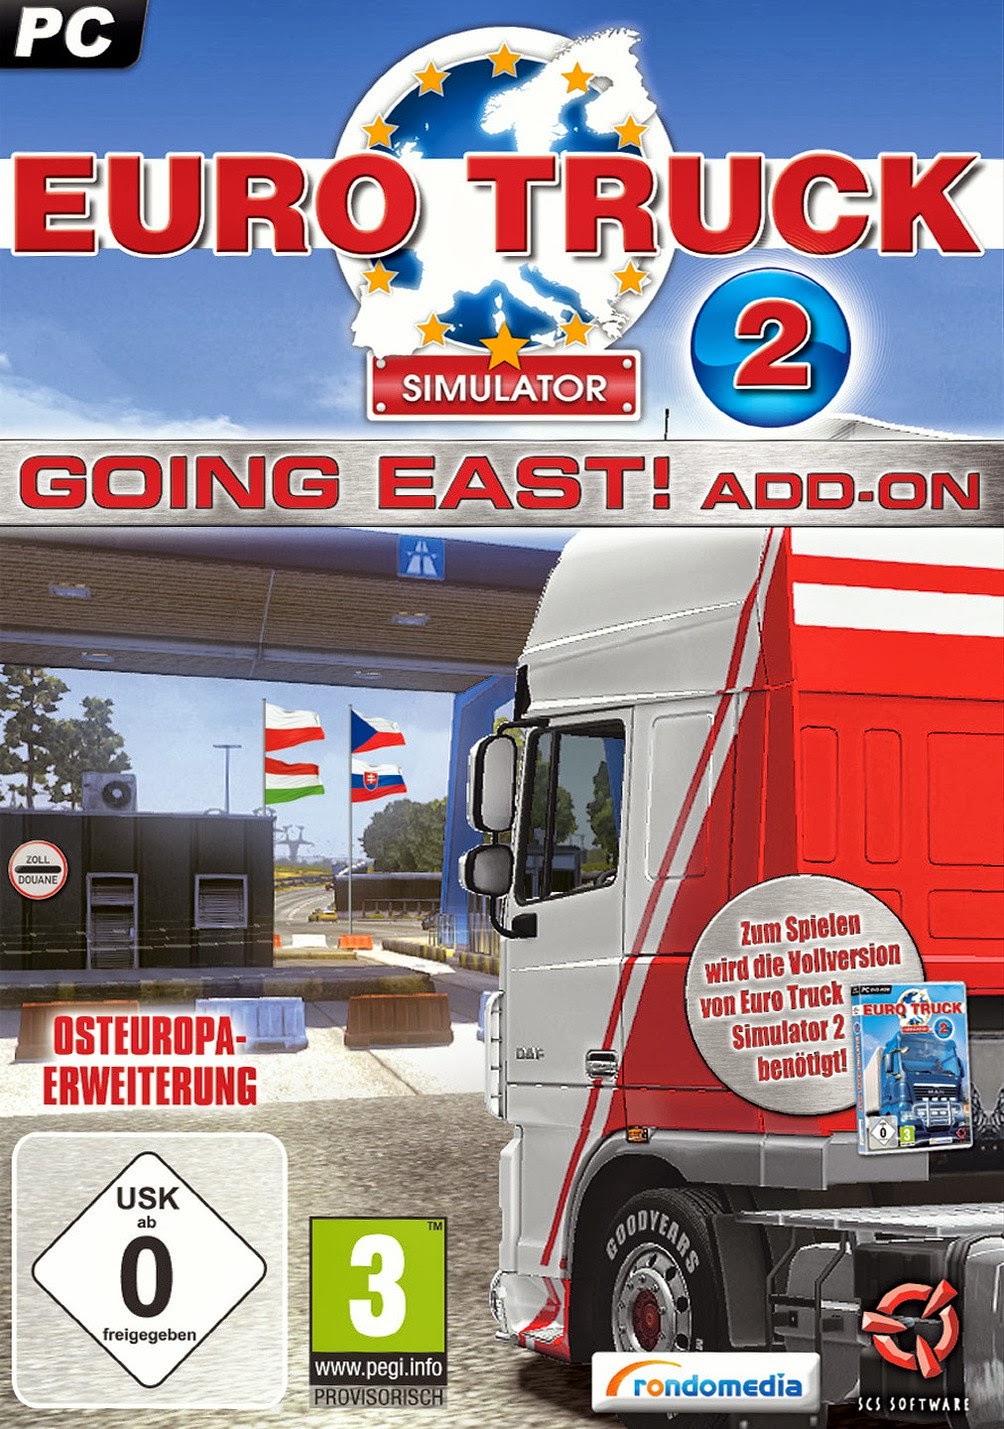 Euro truck simulator 2 going east product key free download